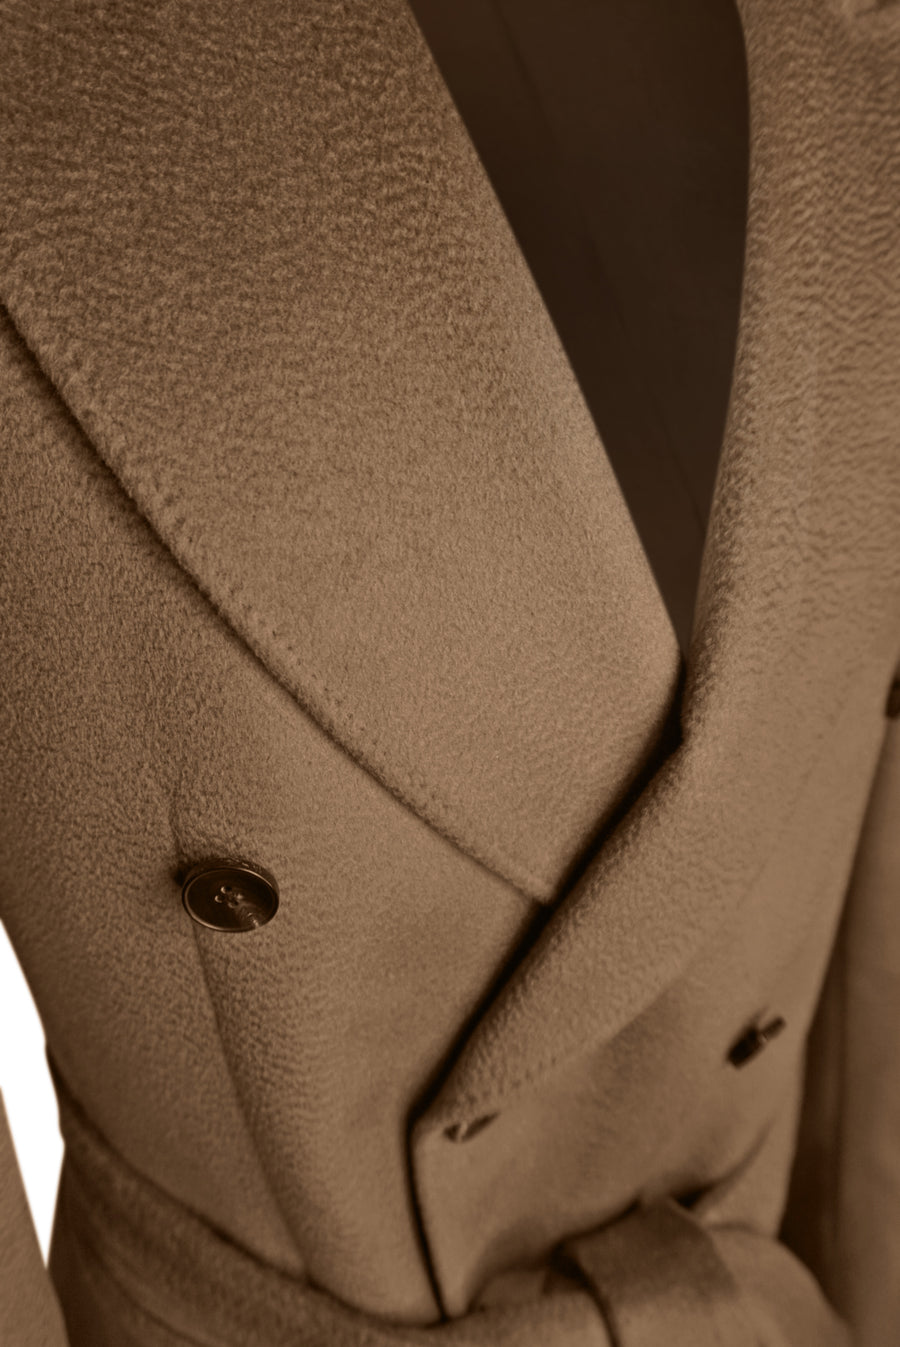 Cashmere Double Breasted Belted Overcoat (walnut)